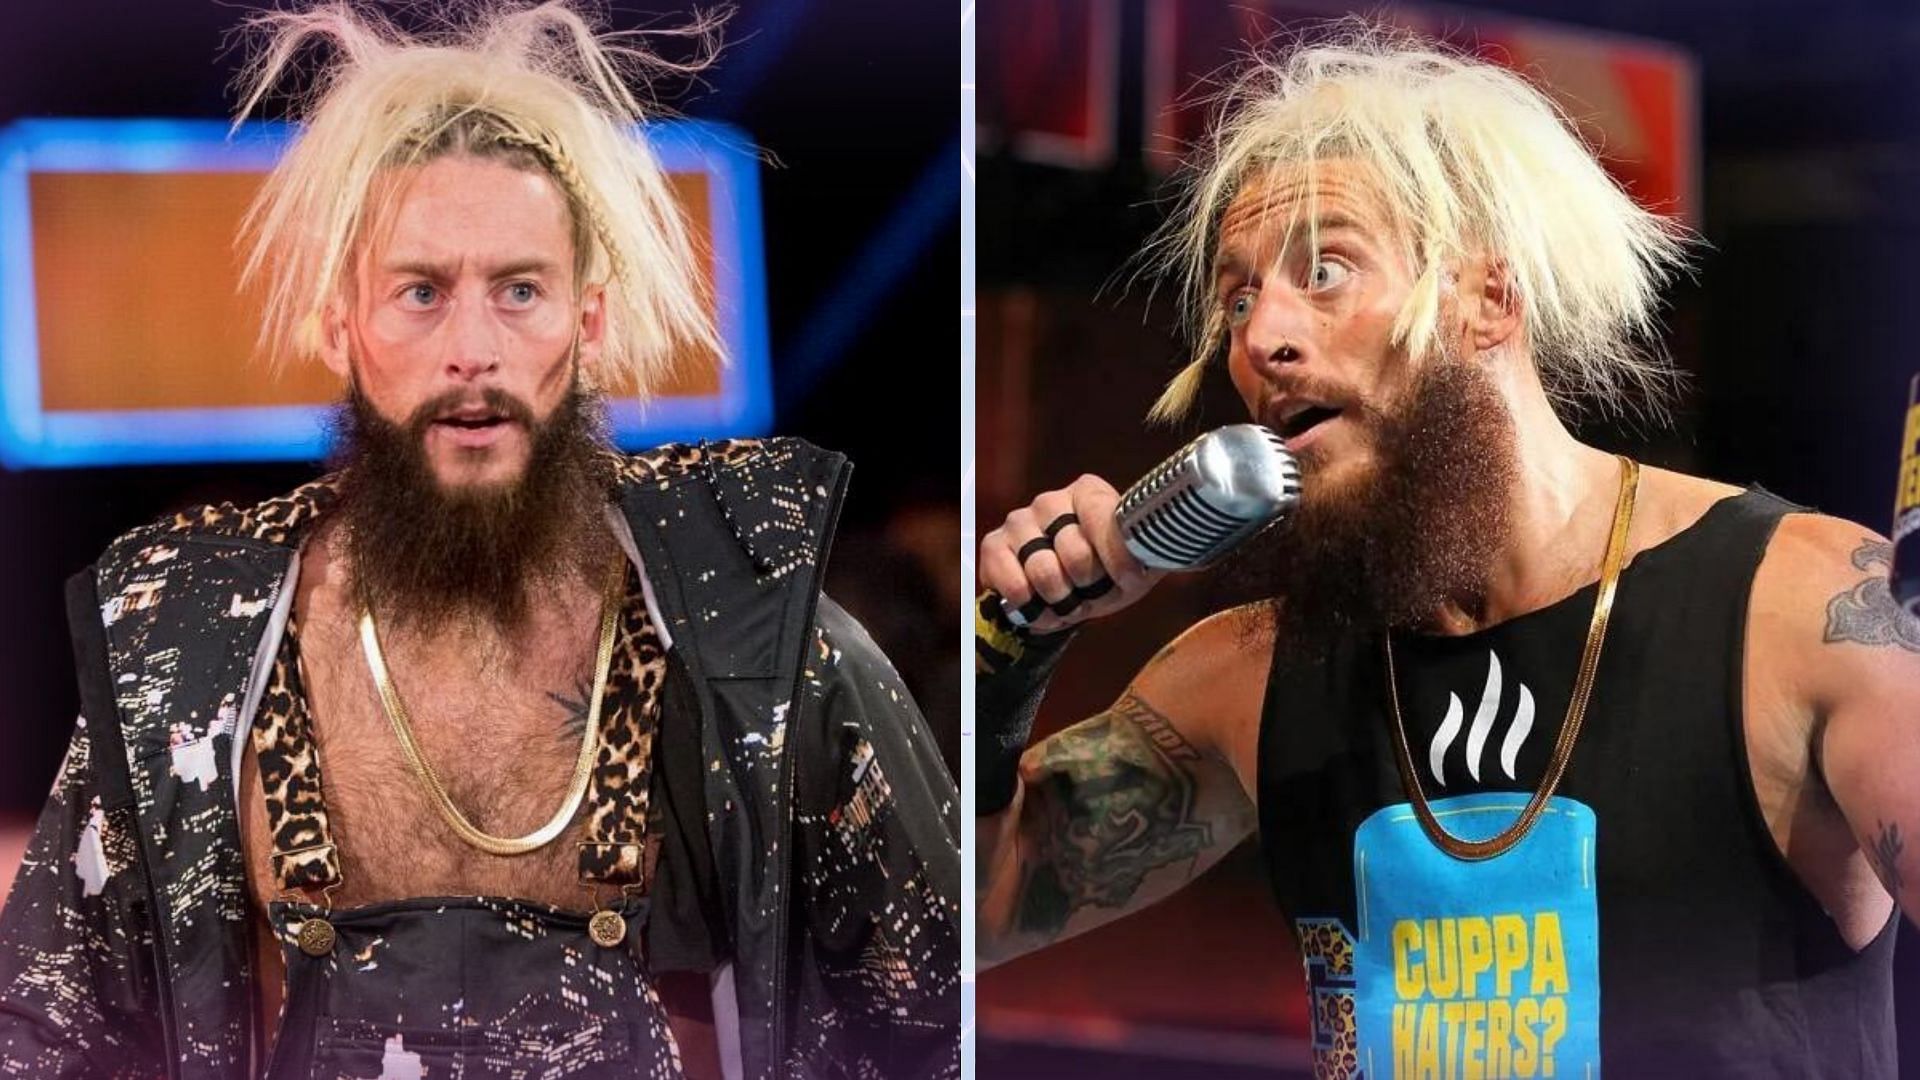 Enzo Amore is former WWE Superstar.